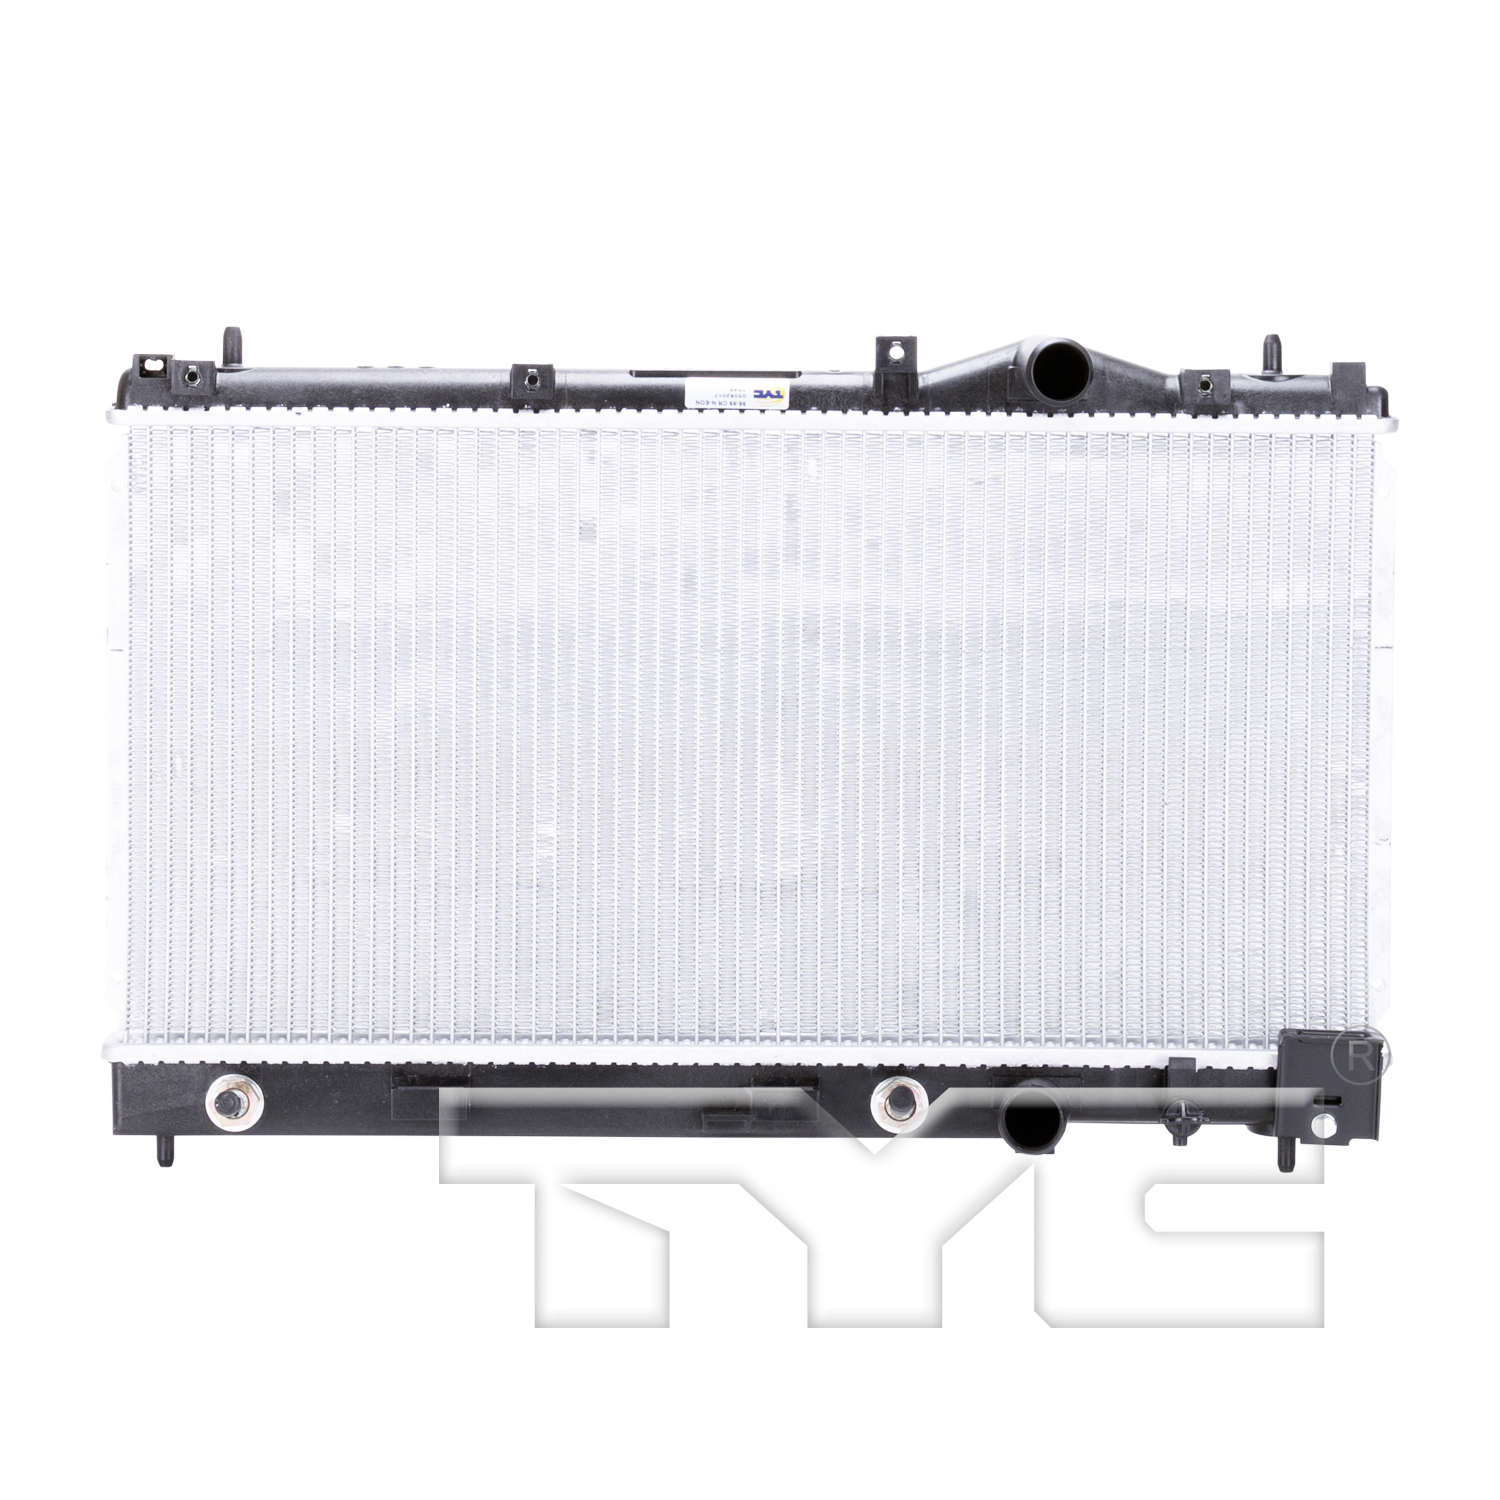 Aftermarket RADIATORS for DODGE - NEON, NEON,95-96,Radiator assembly